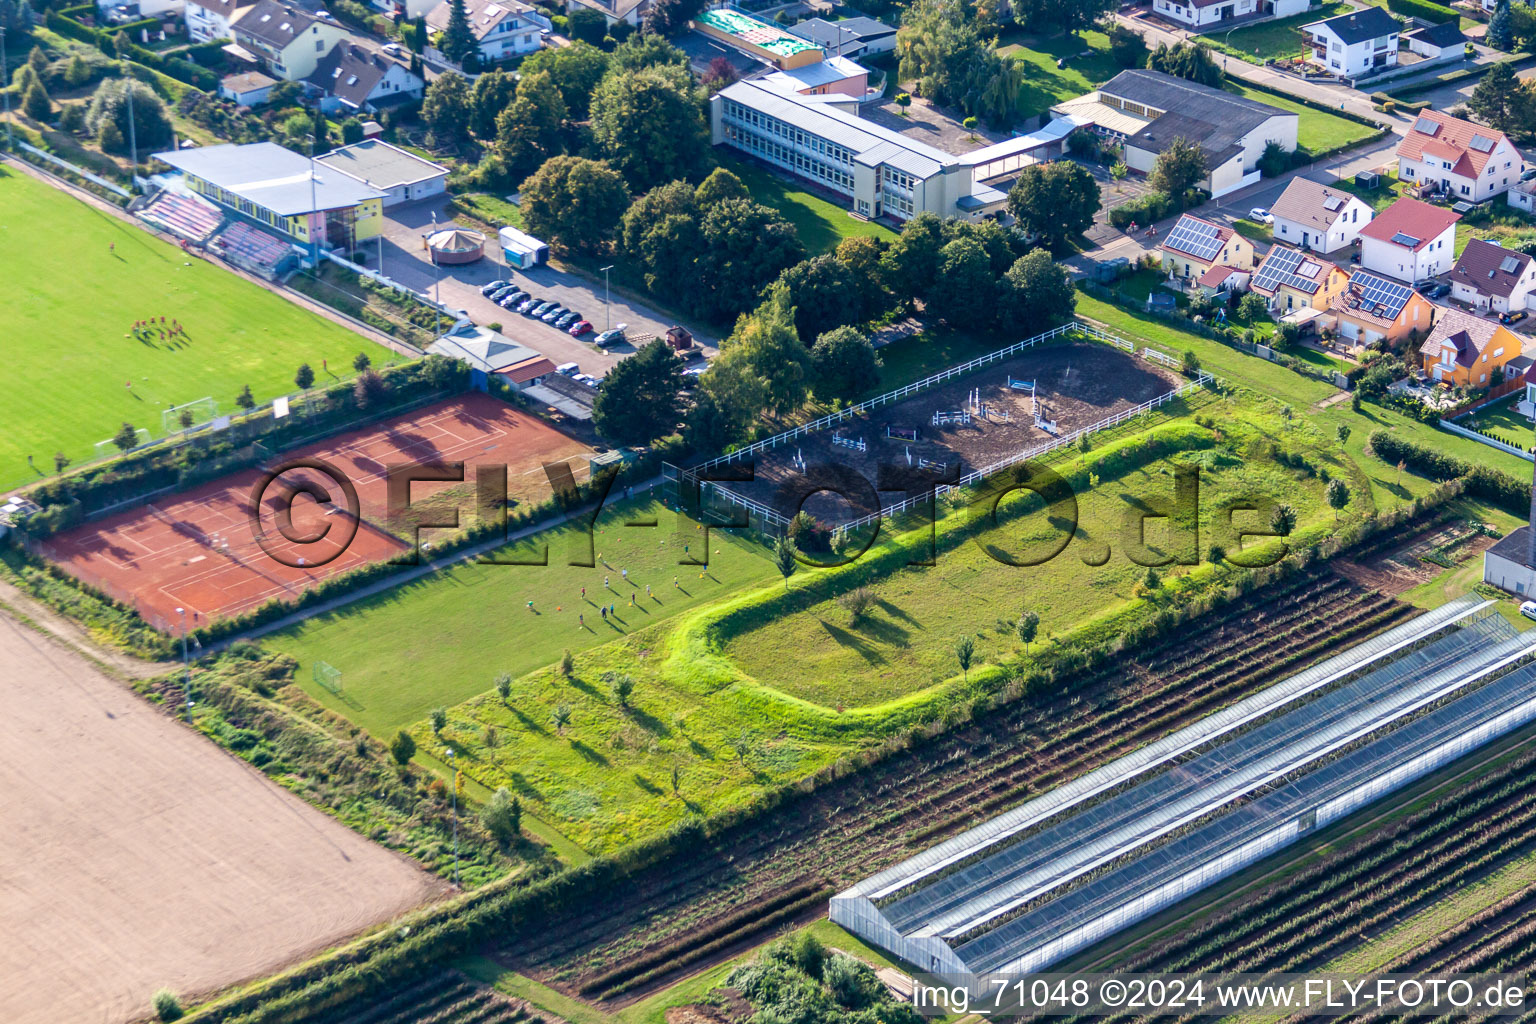 Aerial view of SV Weingarten, tennis club and football field in Weingarten in the state Rhineland-Palatinate, Germany